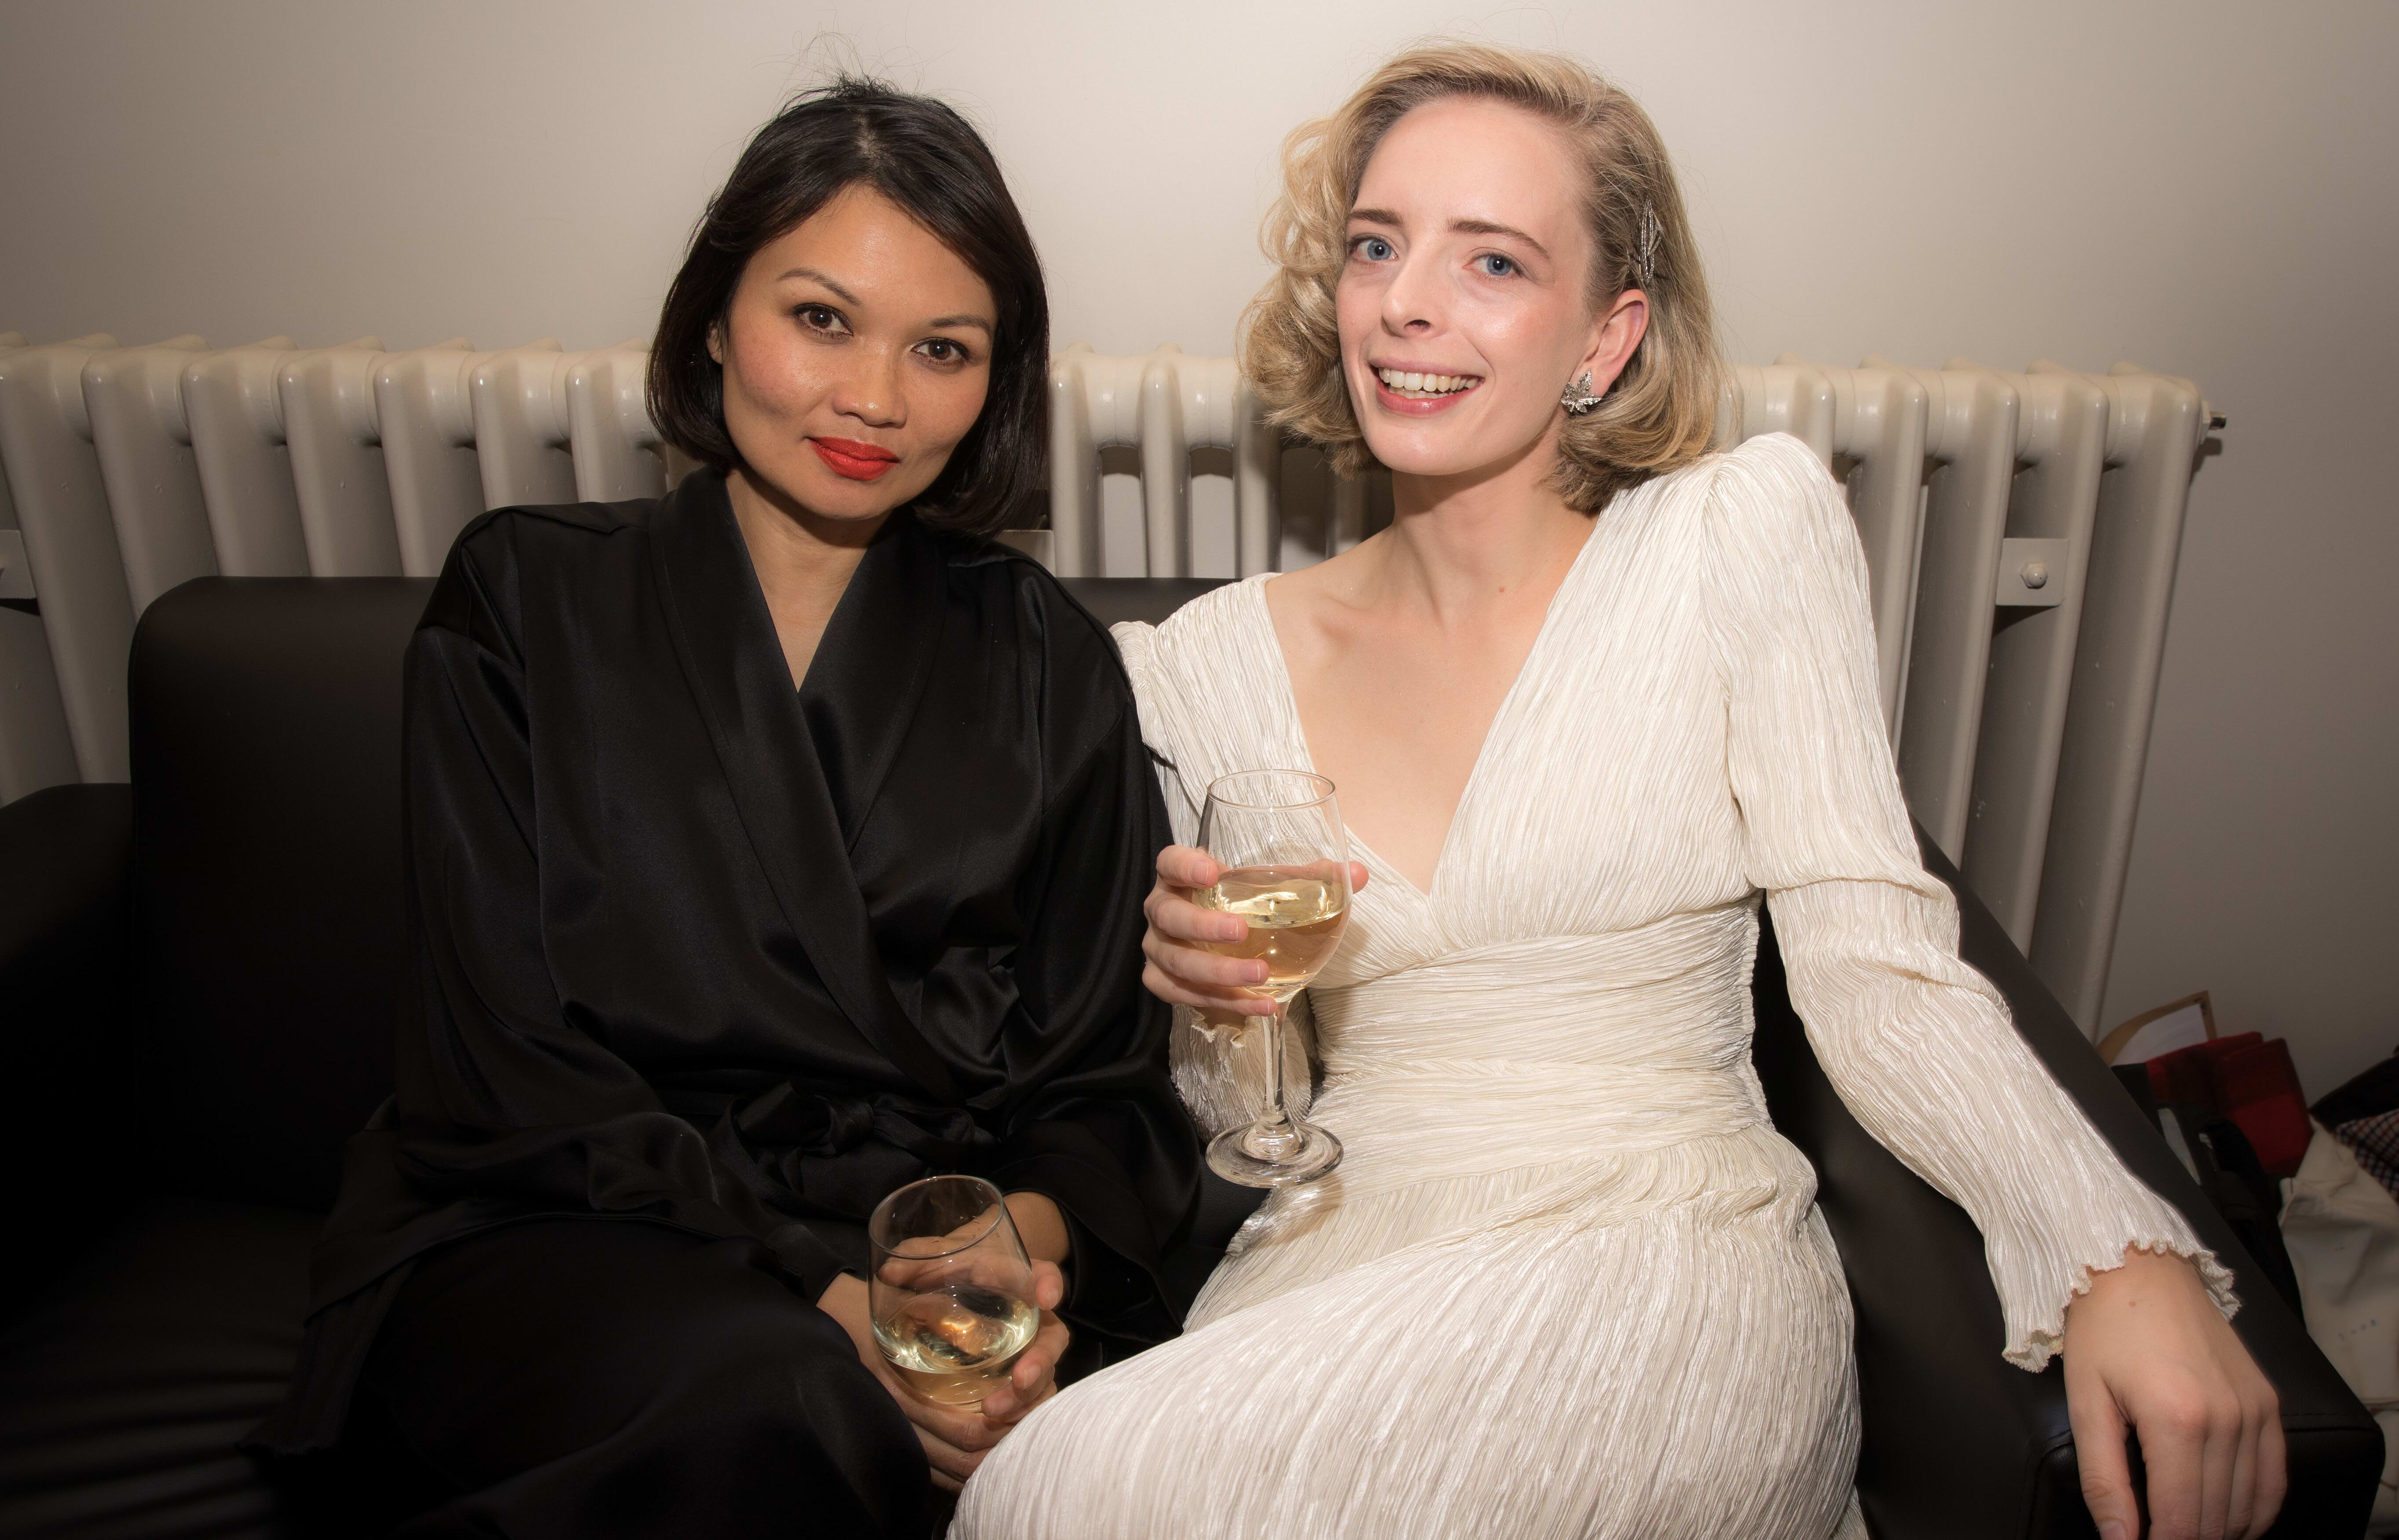 Bic Runga and Chelsea Jade at the Silver Scrolls 2017